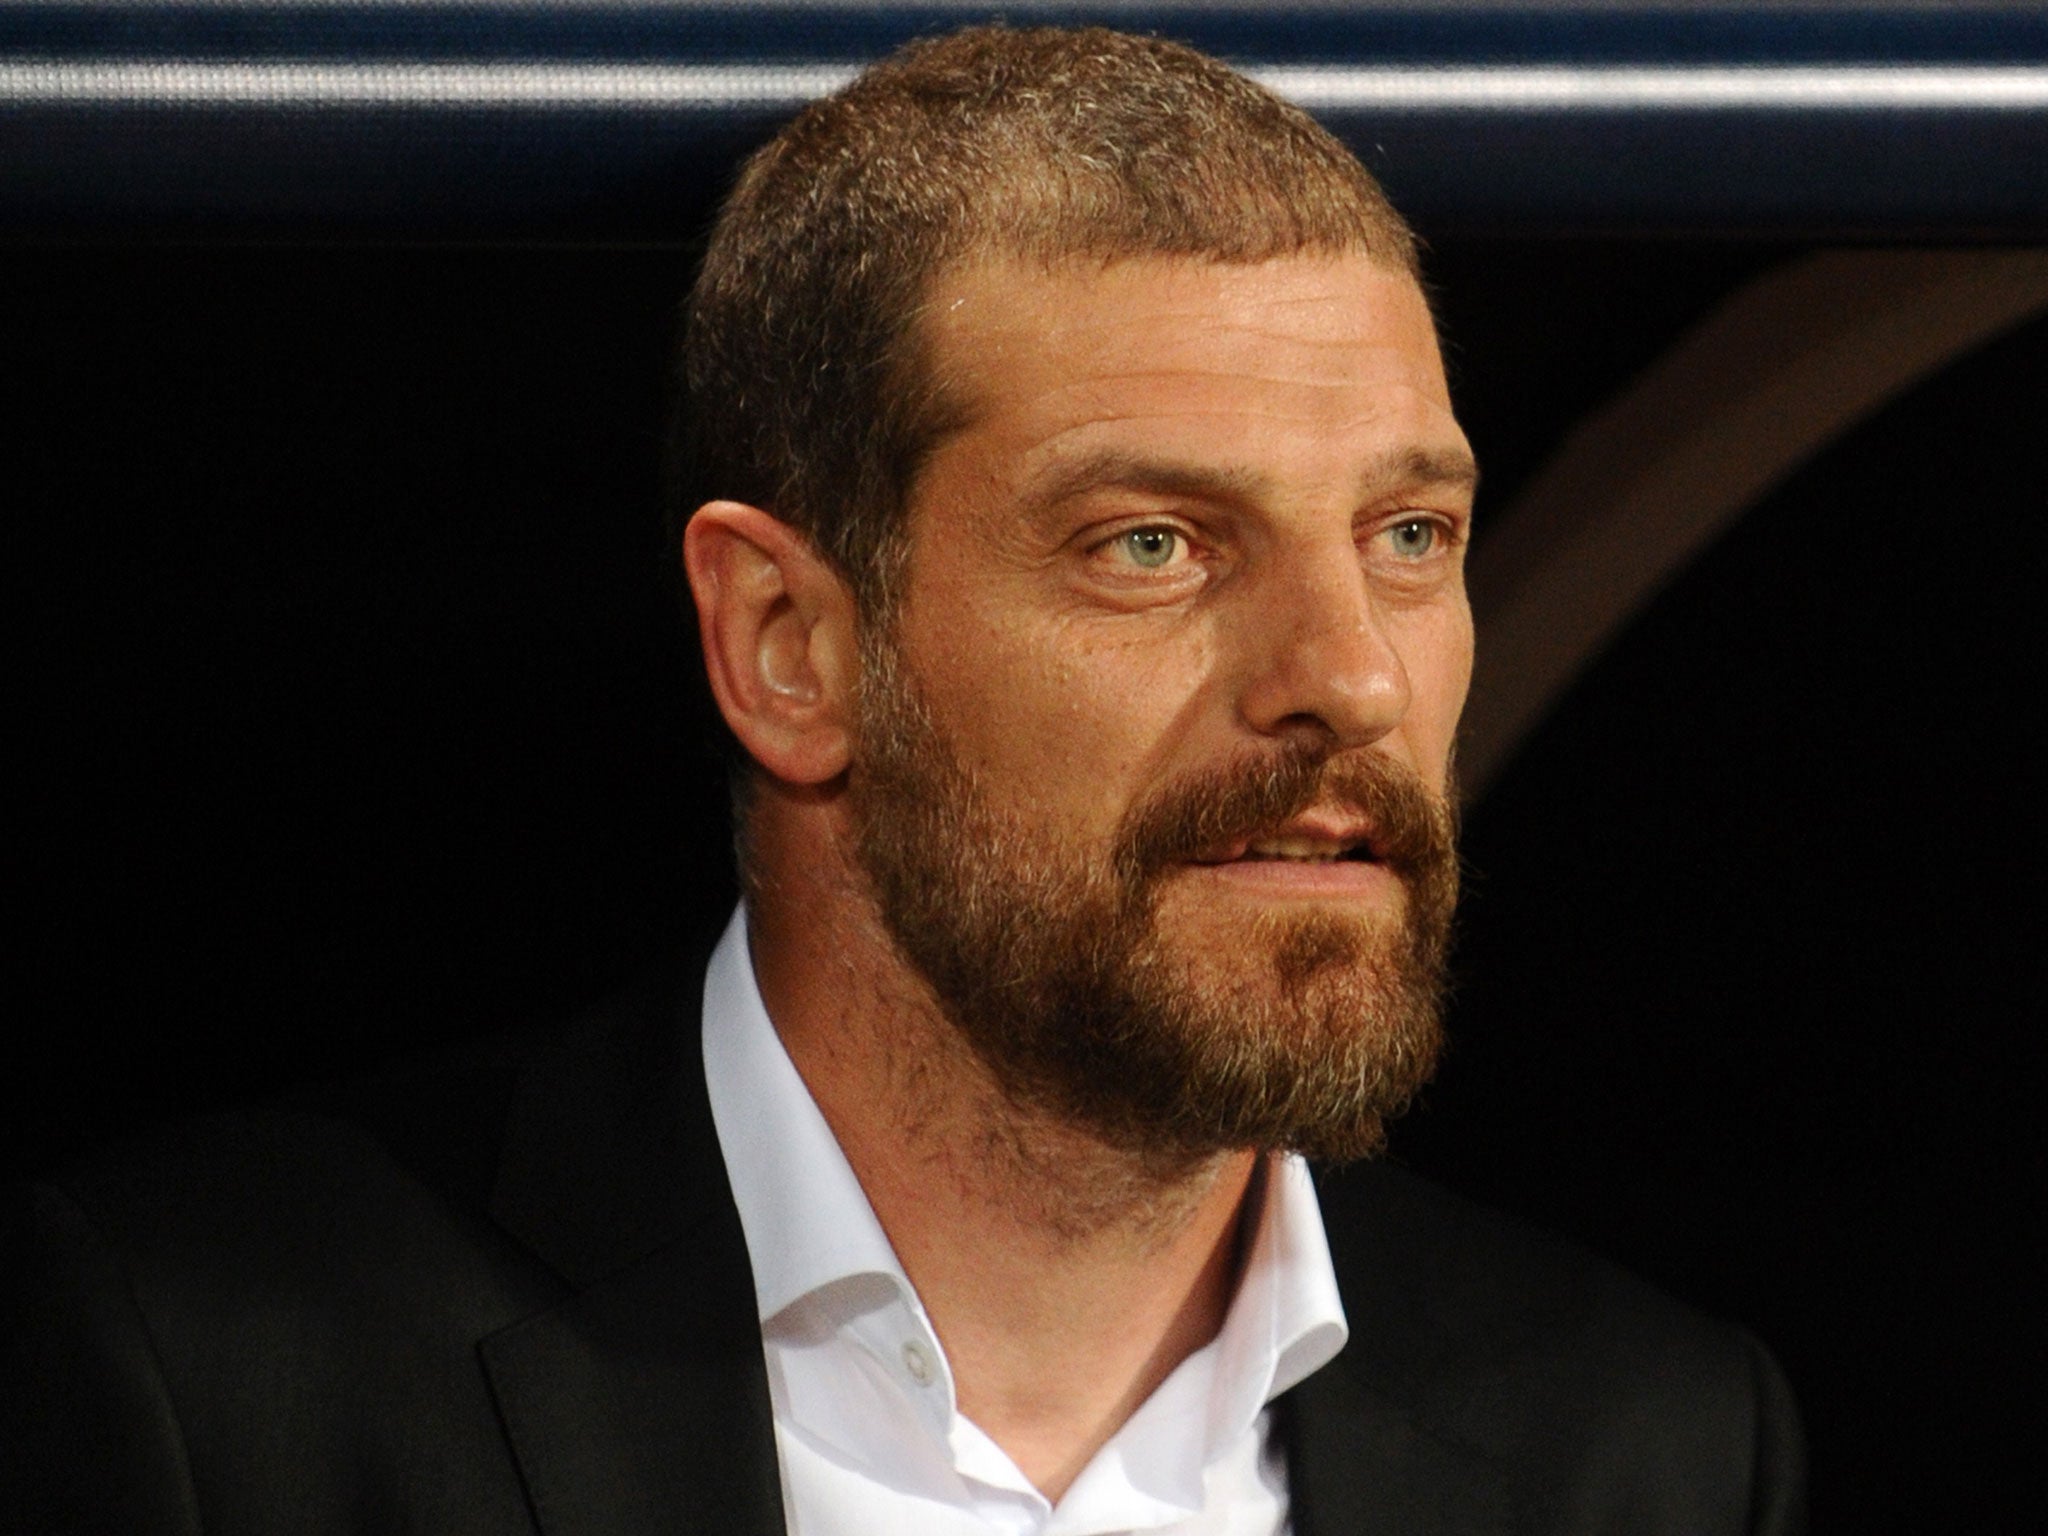 Slaven Bilic looks on from the touchline